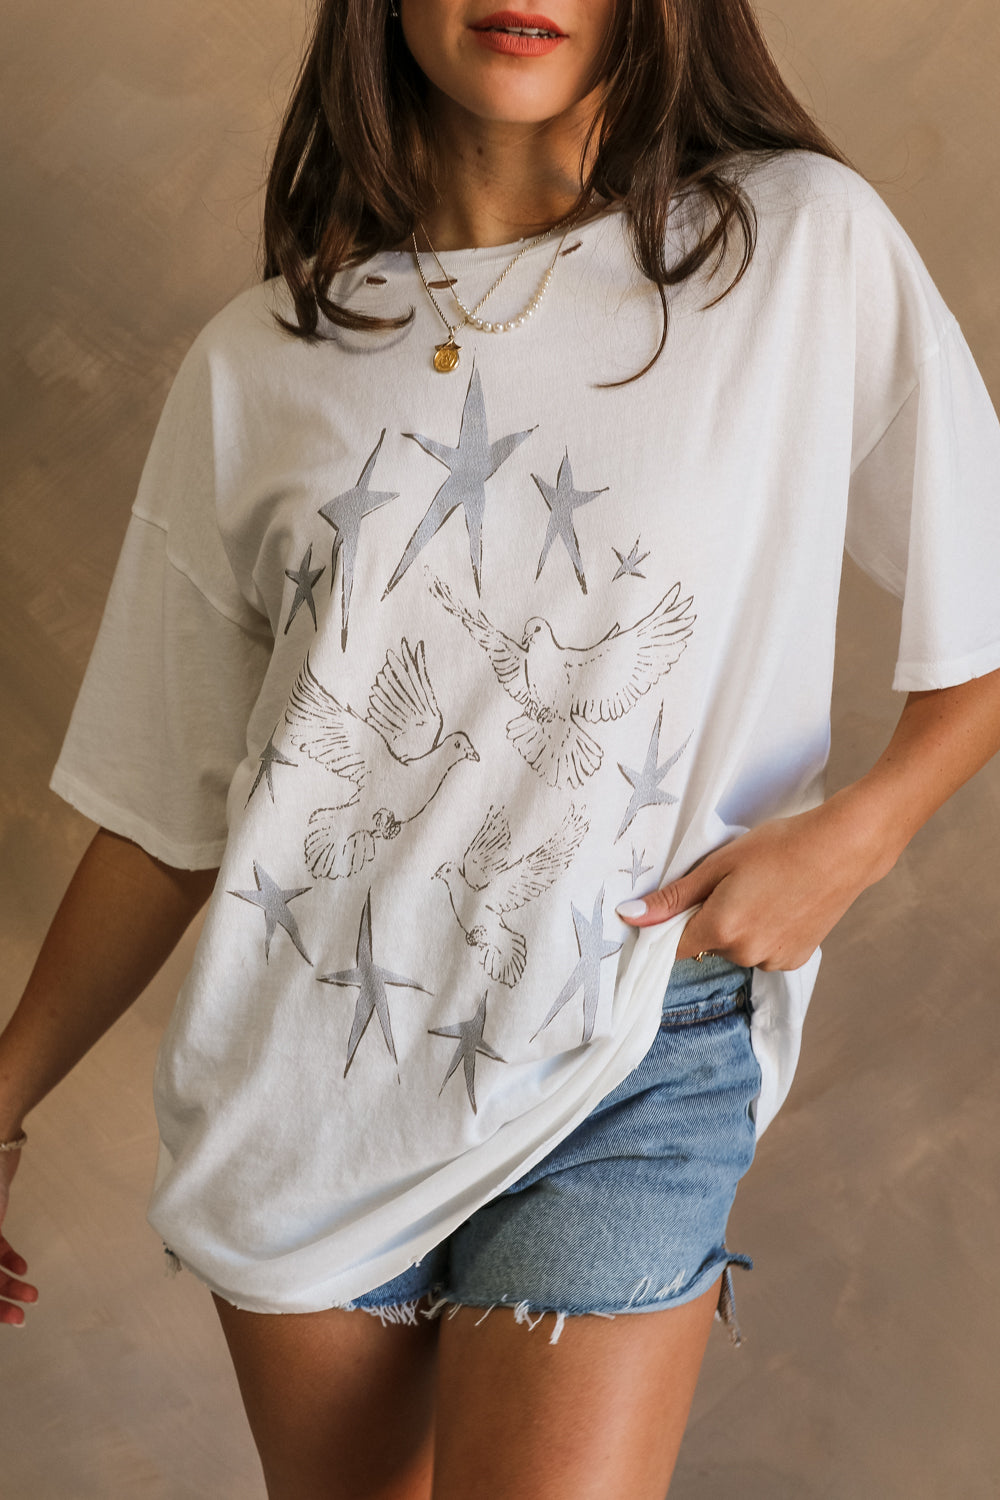 Close up view of female model wearing the Stars and Birds White Distressed Graphic Top which features White Cotton Fabric, Distressed Details, Short Sleeves, Round Neckline and Stars and Birds Graphic